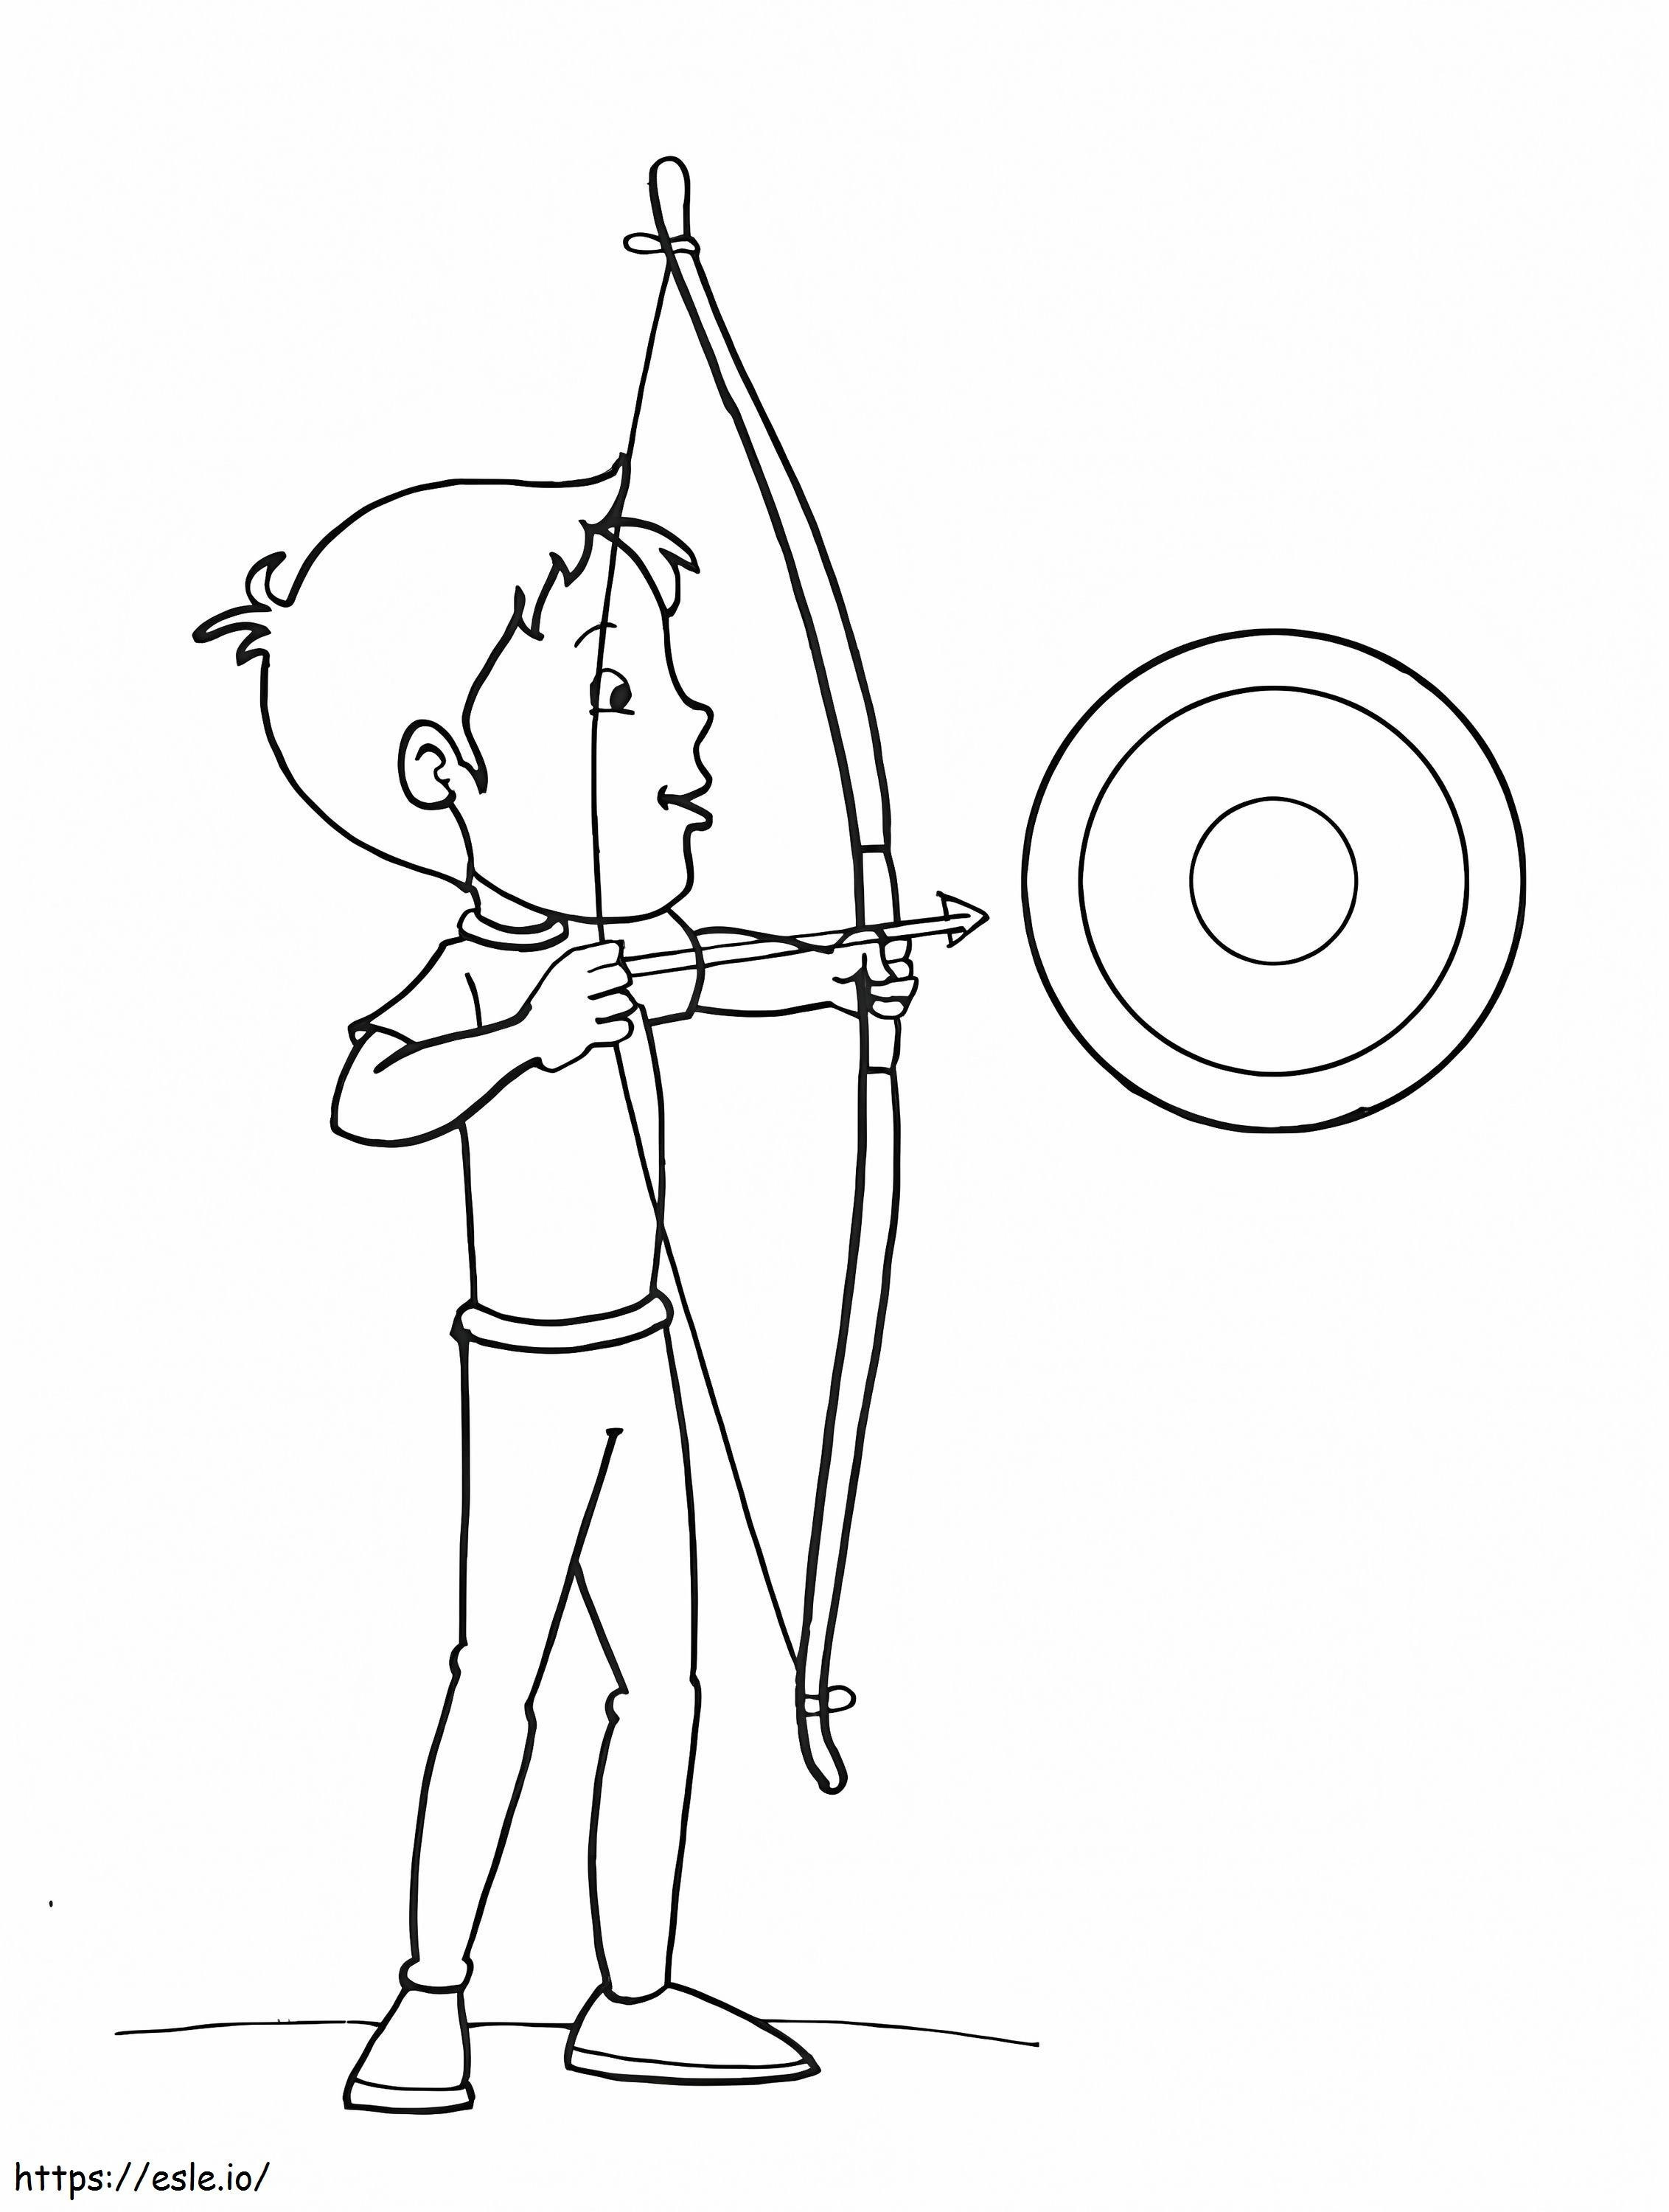 Boy Aims An Arrow coloring page